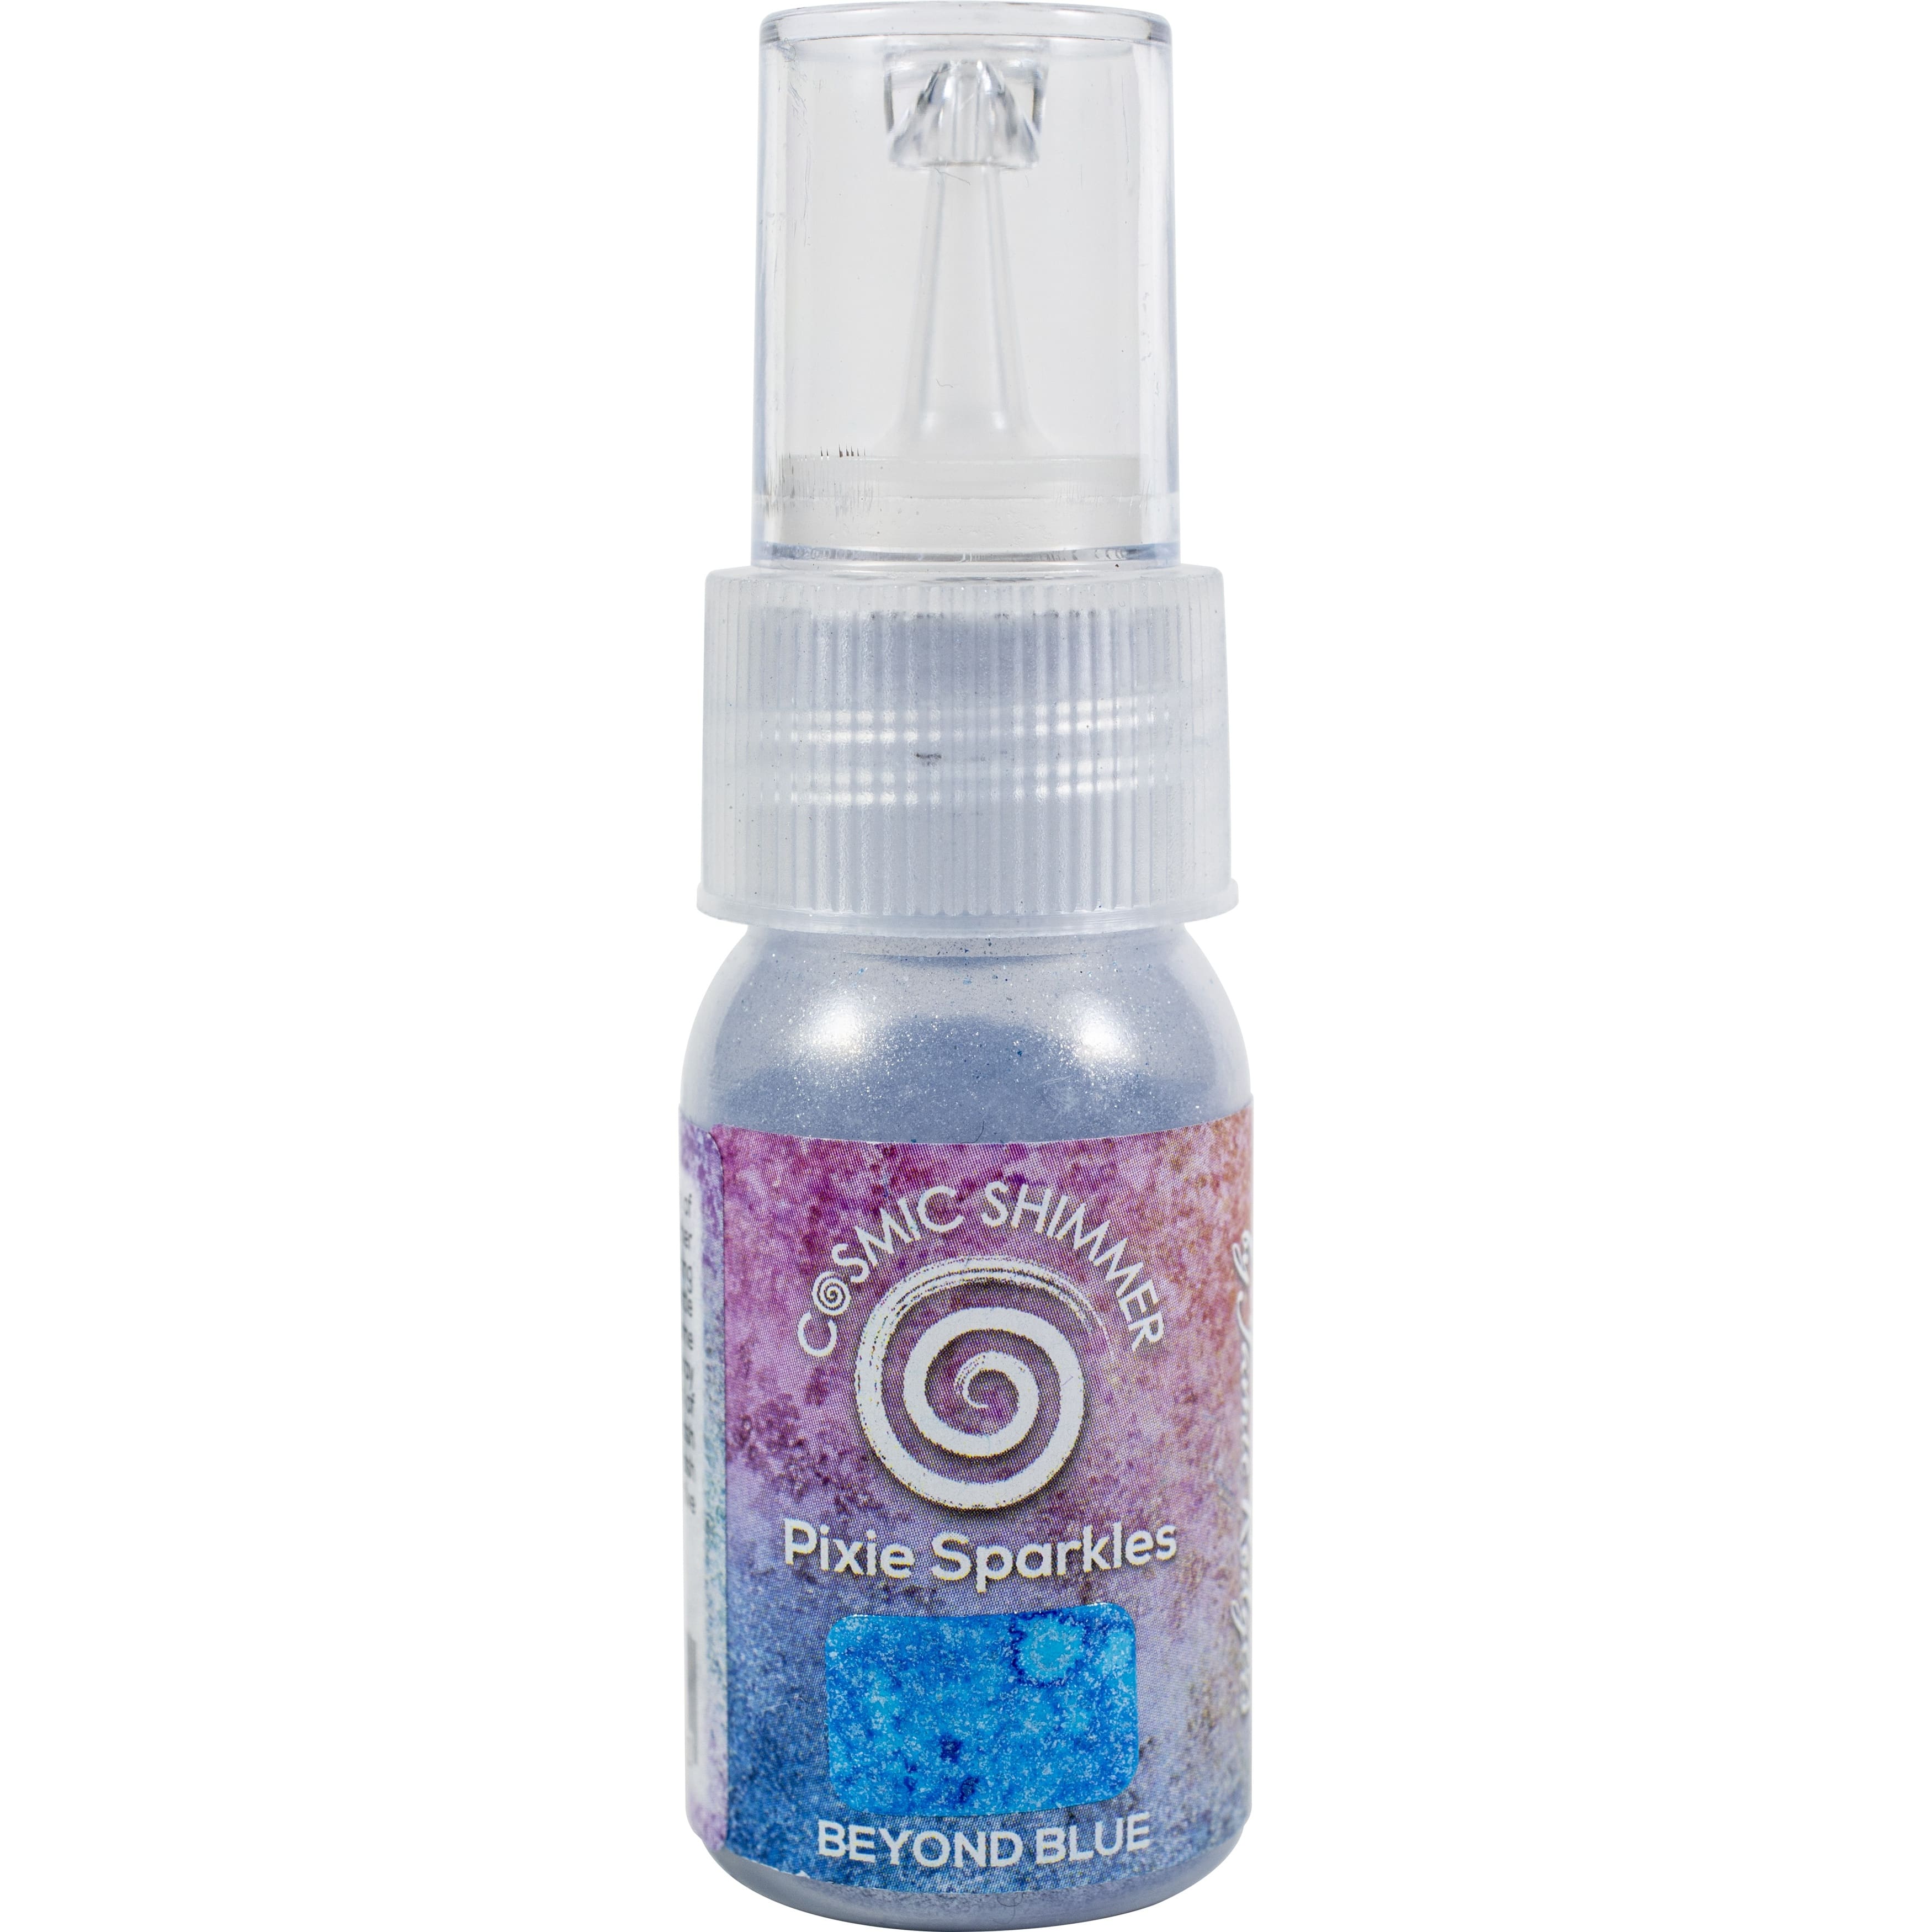 Creative Expressions Cosmic Shimmer Pixie Sparkles, 30mL